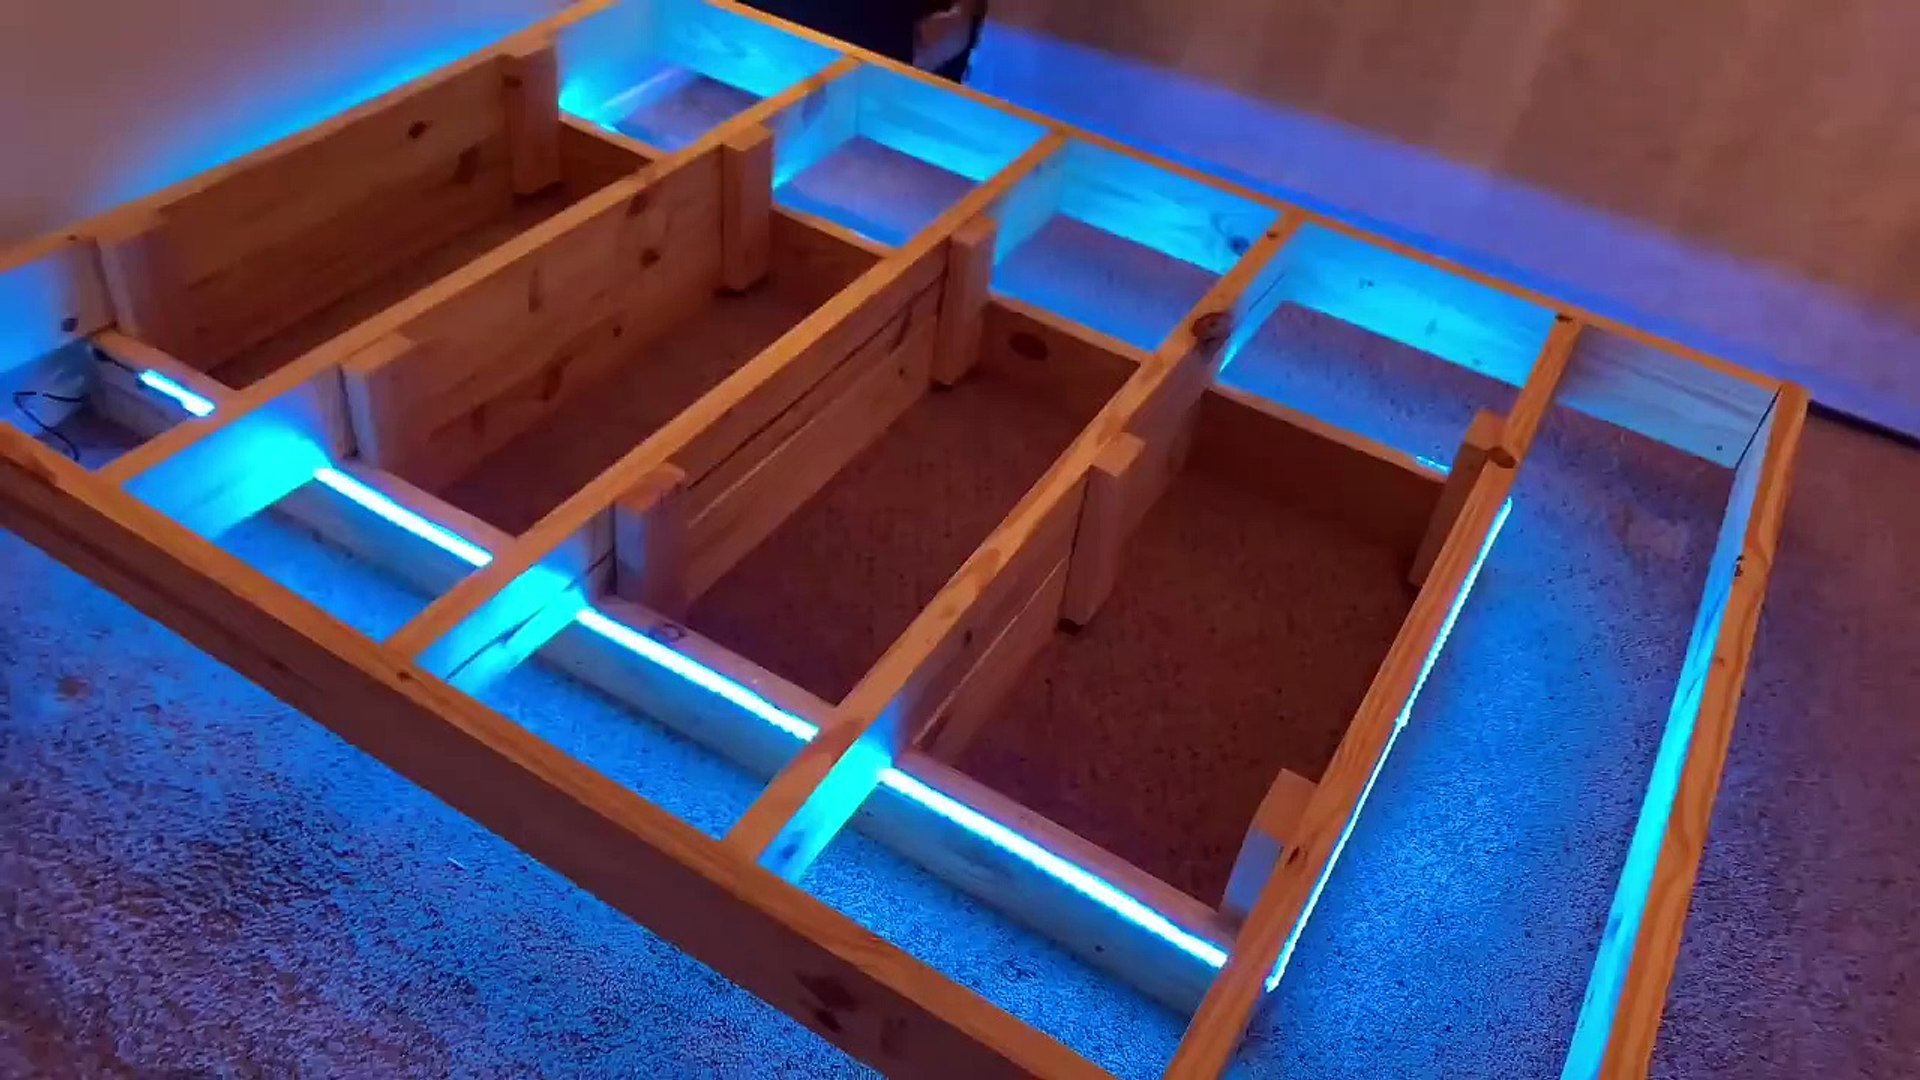 Diy Floating Bed Frame With Led Lights - video Dailymotion